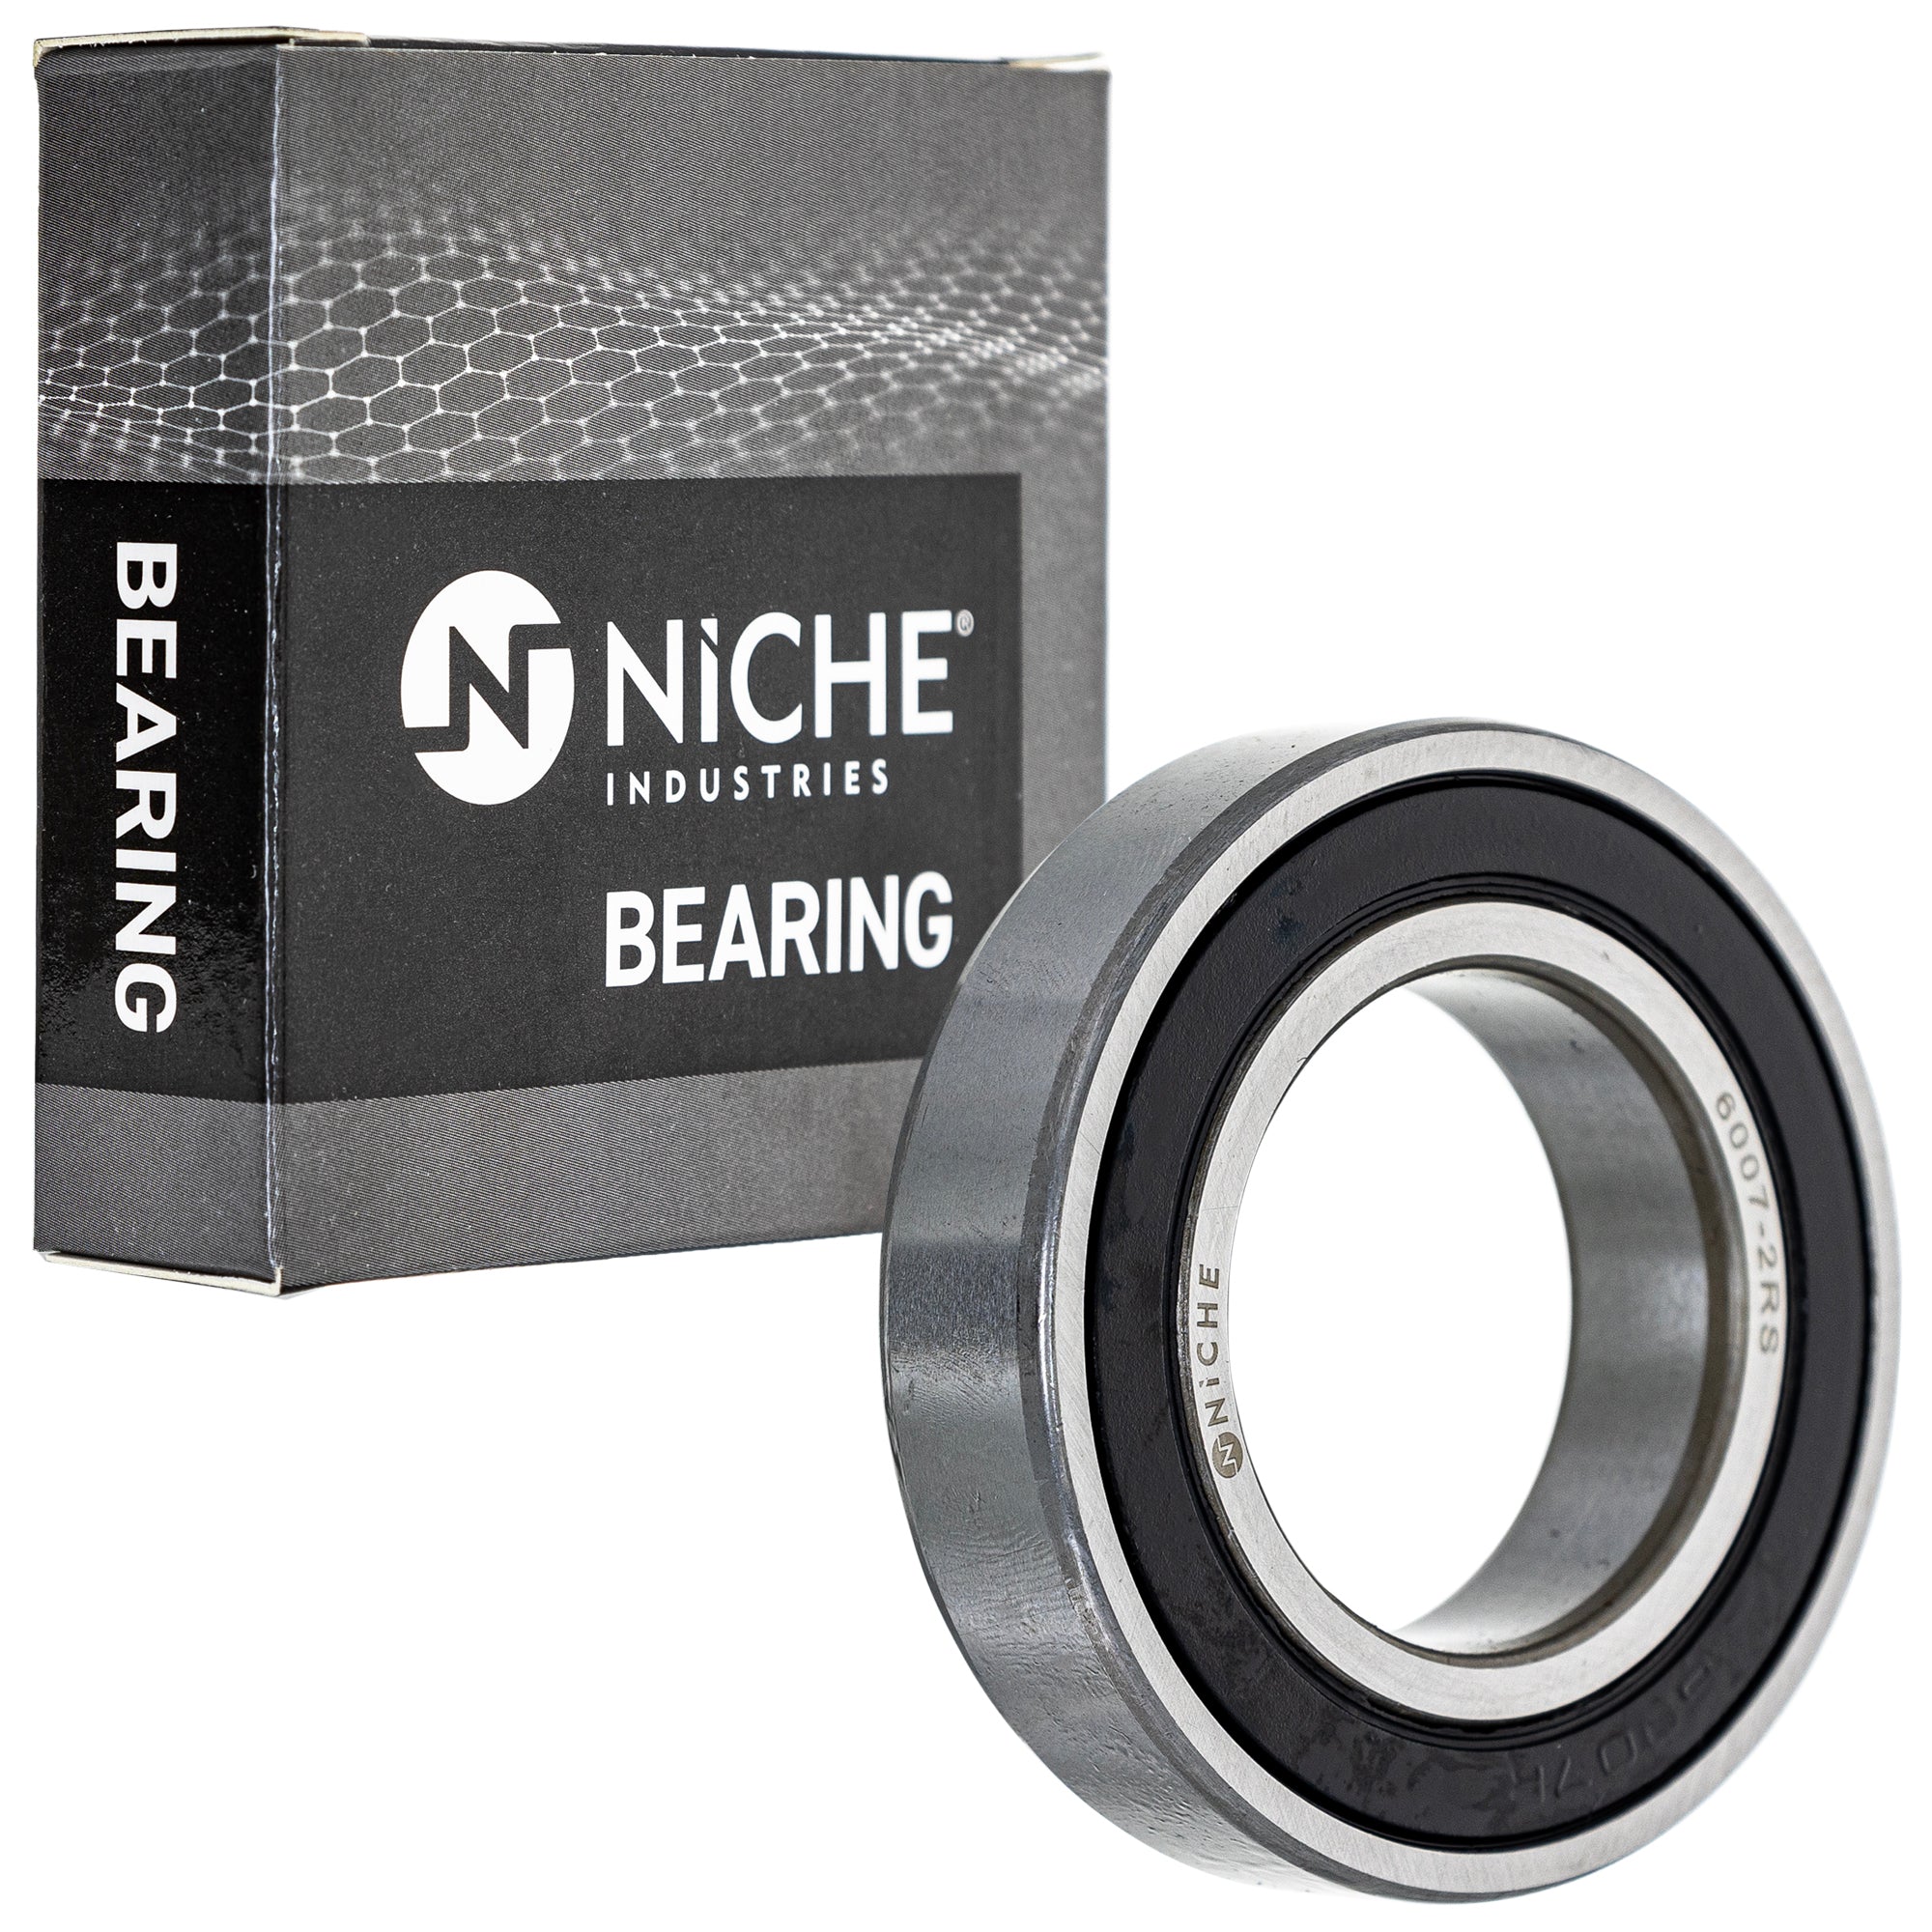 NICHE 519-CBB2220R Bearing 10-Pack for zOTHER Polaris BRP Can-Am